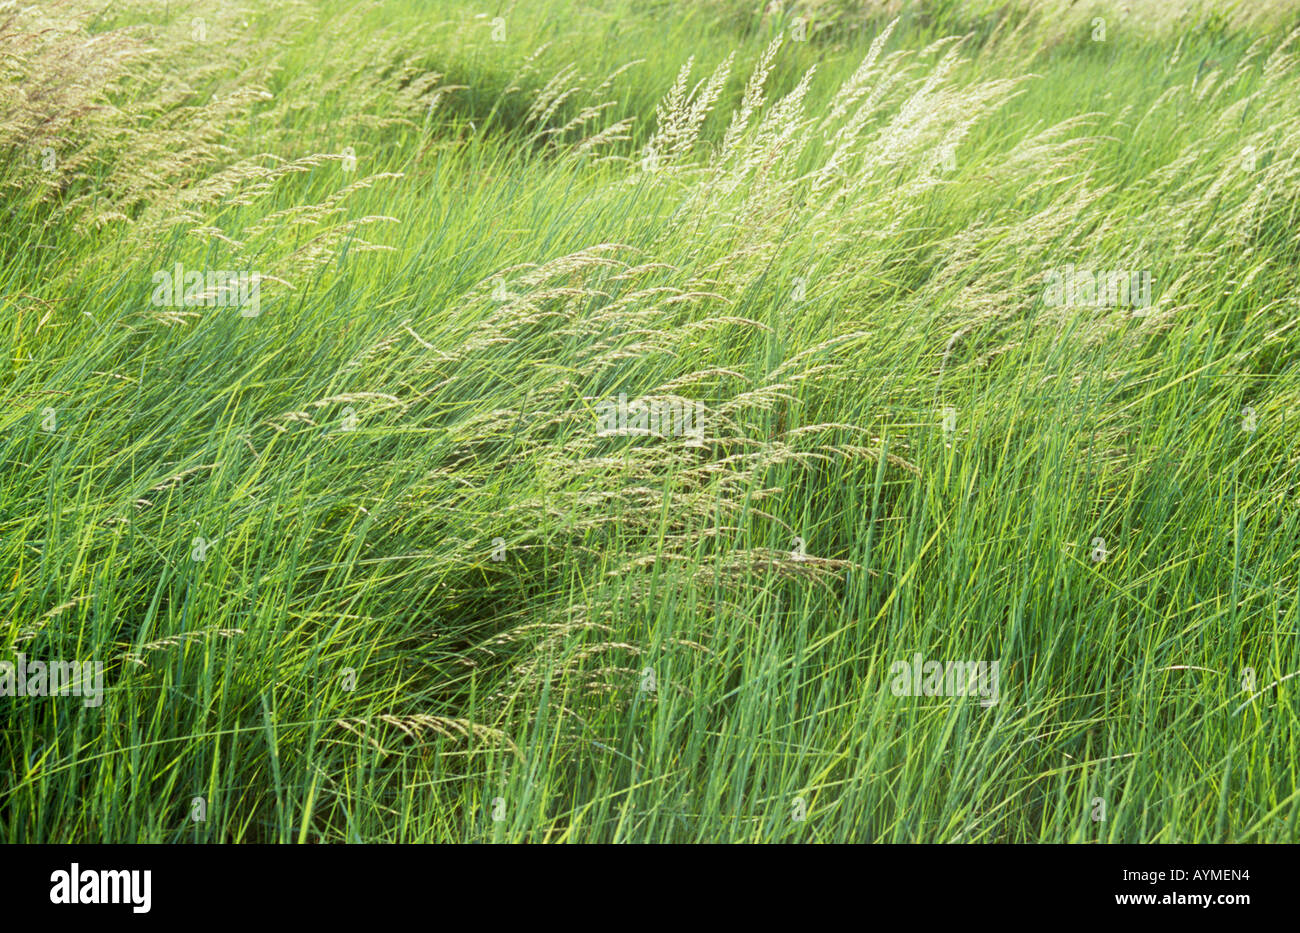 Fresh blue green Rough meadow grass or Poa trivialis waving in the breeze in a field or pasture Stock Photo